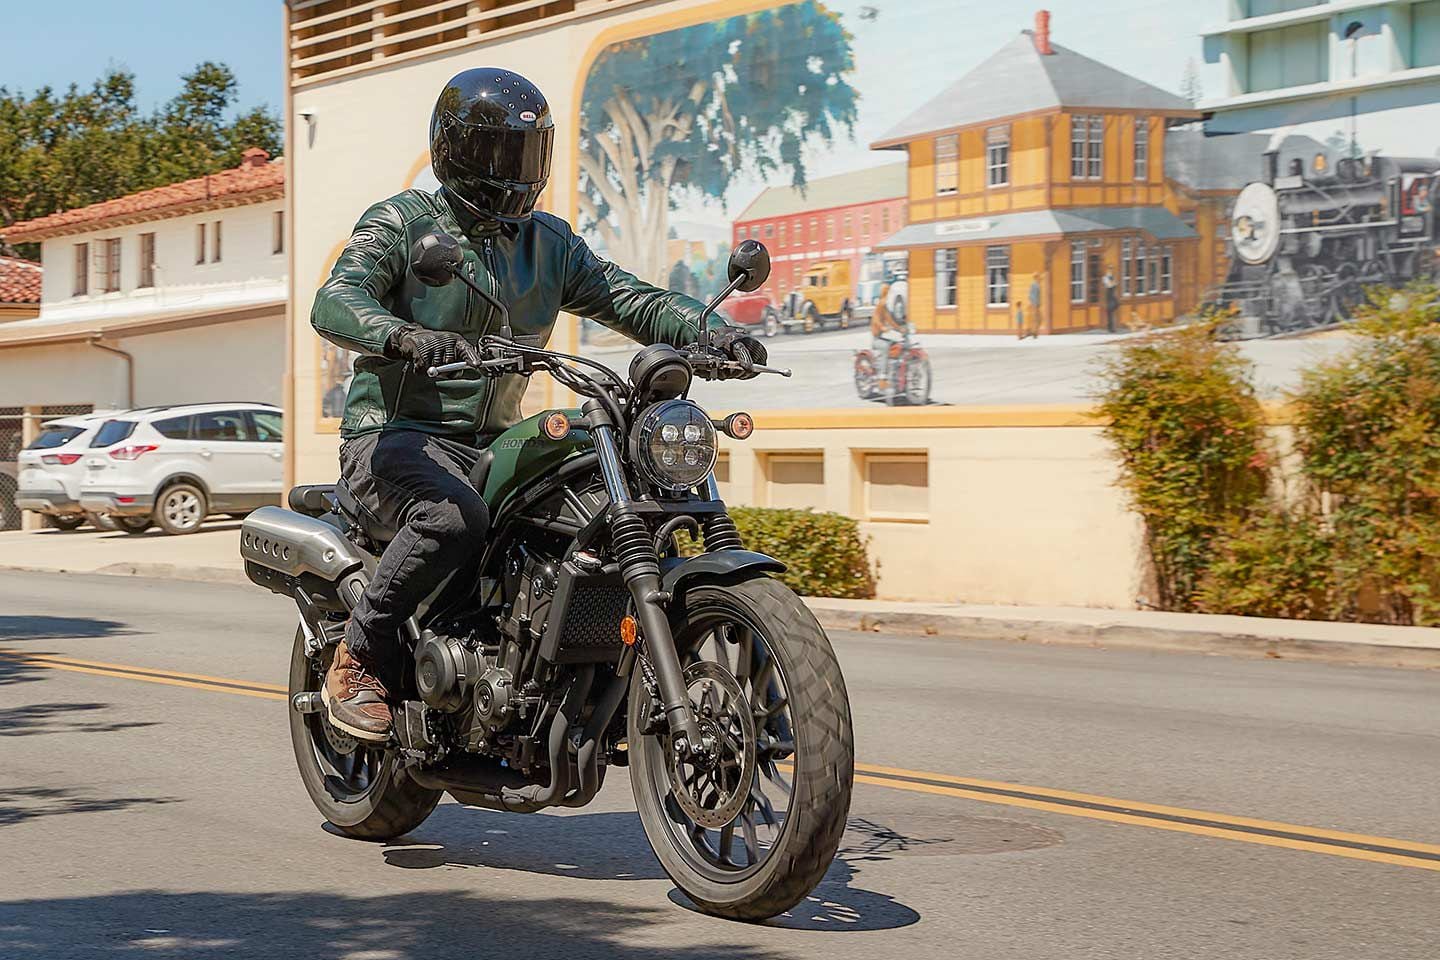 A natural, upright riding position makes the SCL500 plenty comfortable for around-town cruising. We tried Honda’s 30mm-taller accessory seat (not used in picture), and noticed that it opened up the rider triangle, creating less of a bend at the knees.